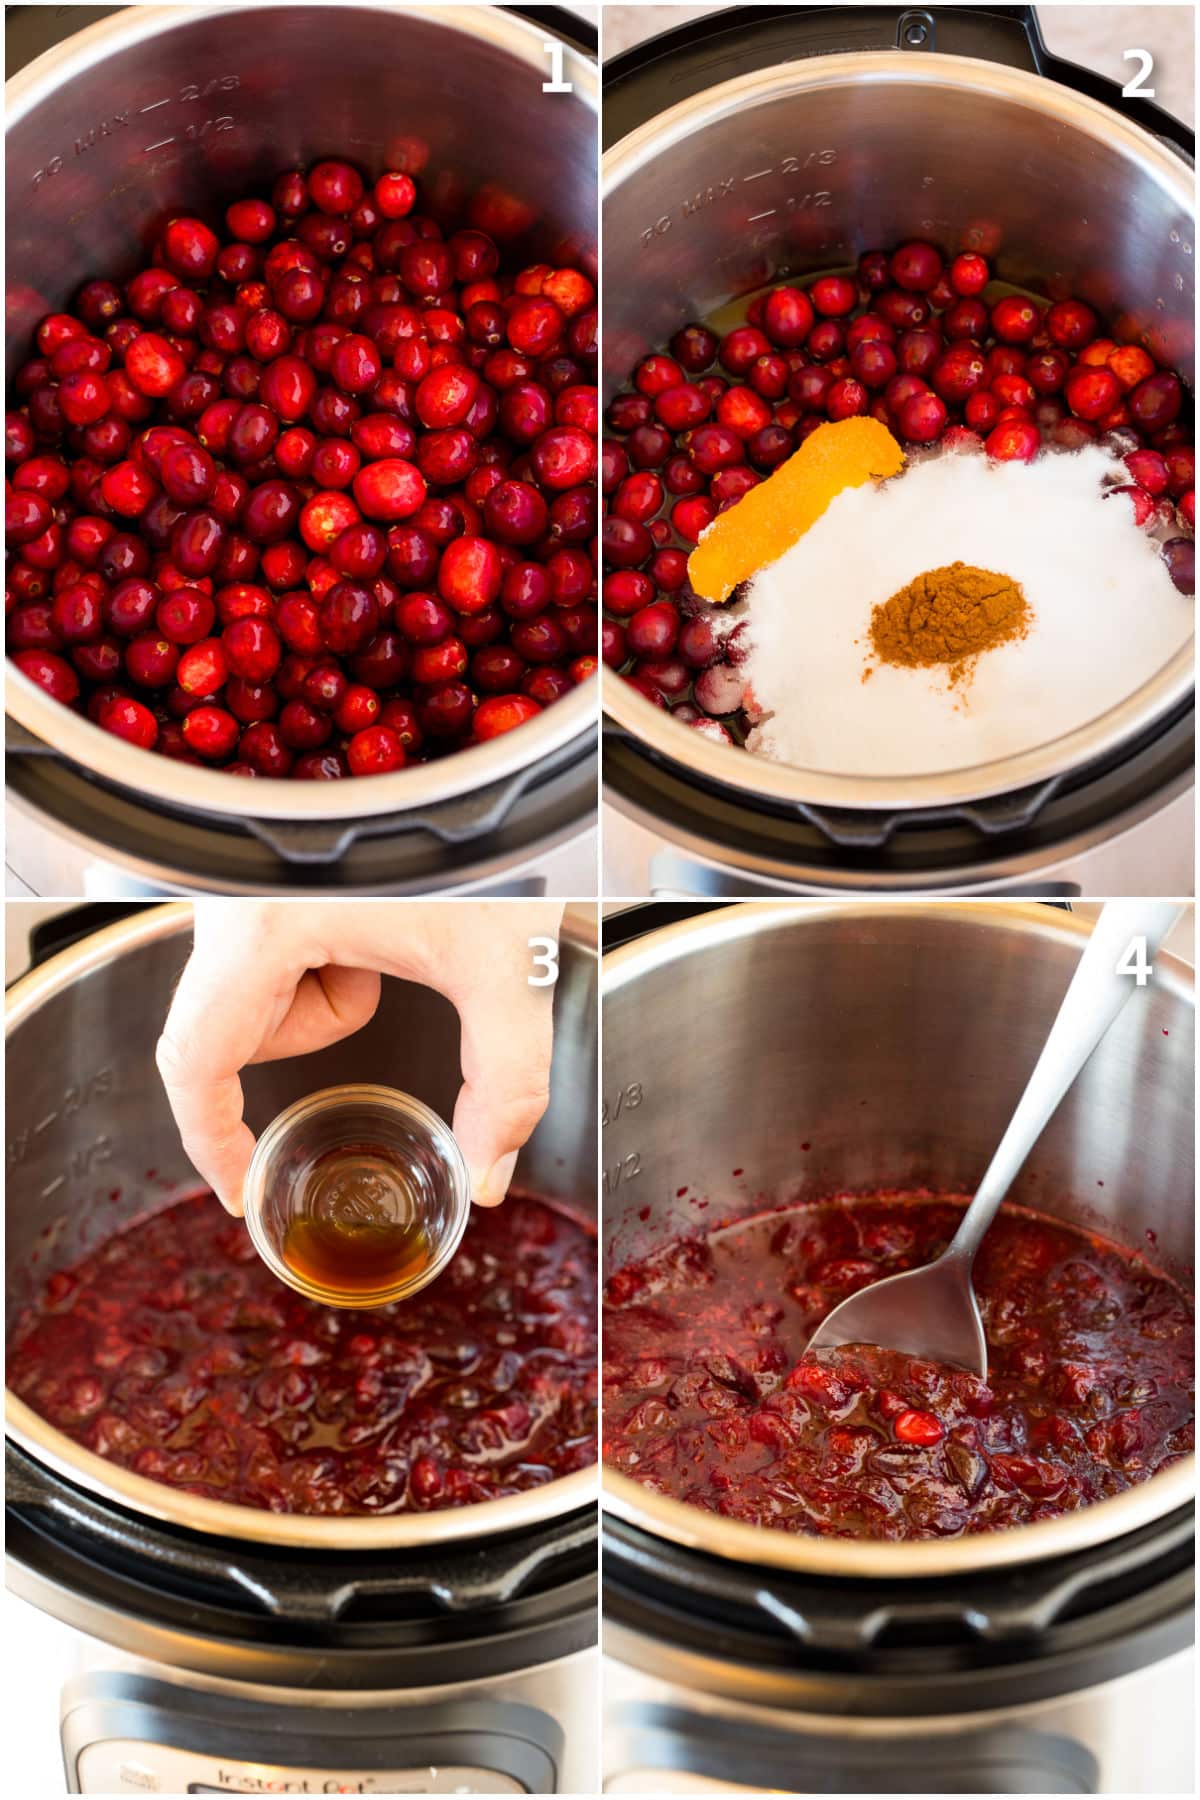 Step by step shots showing how to make cranberry sauce in the Instant Pot.